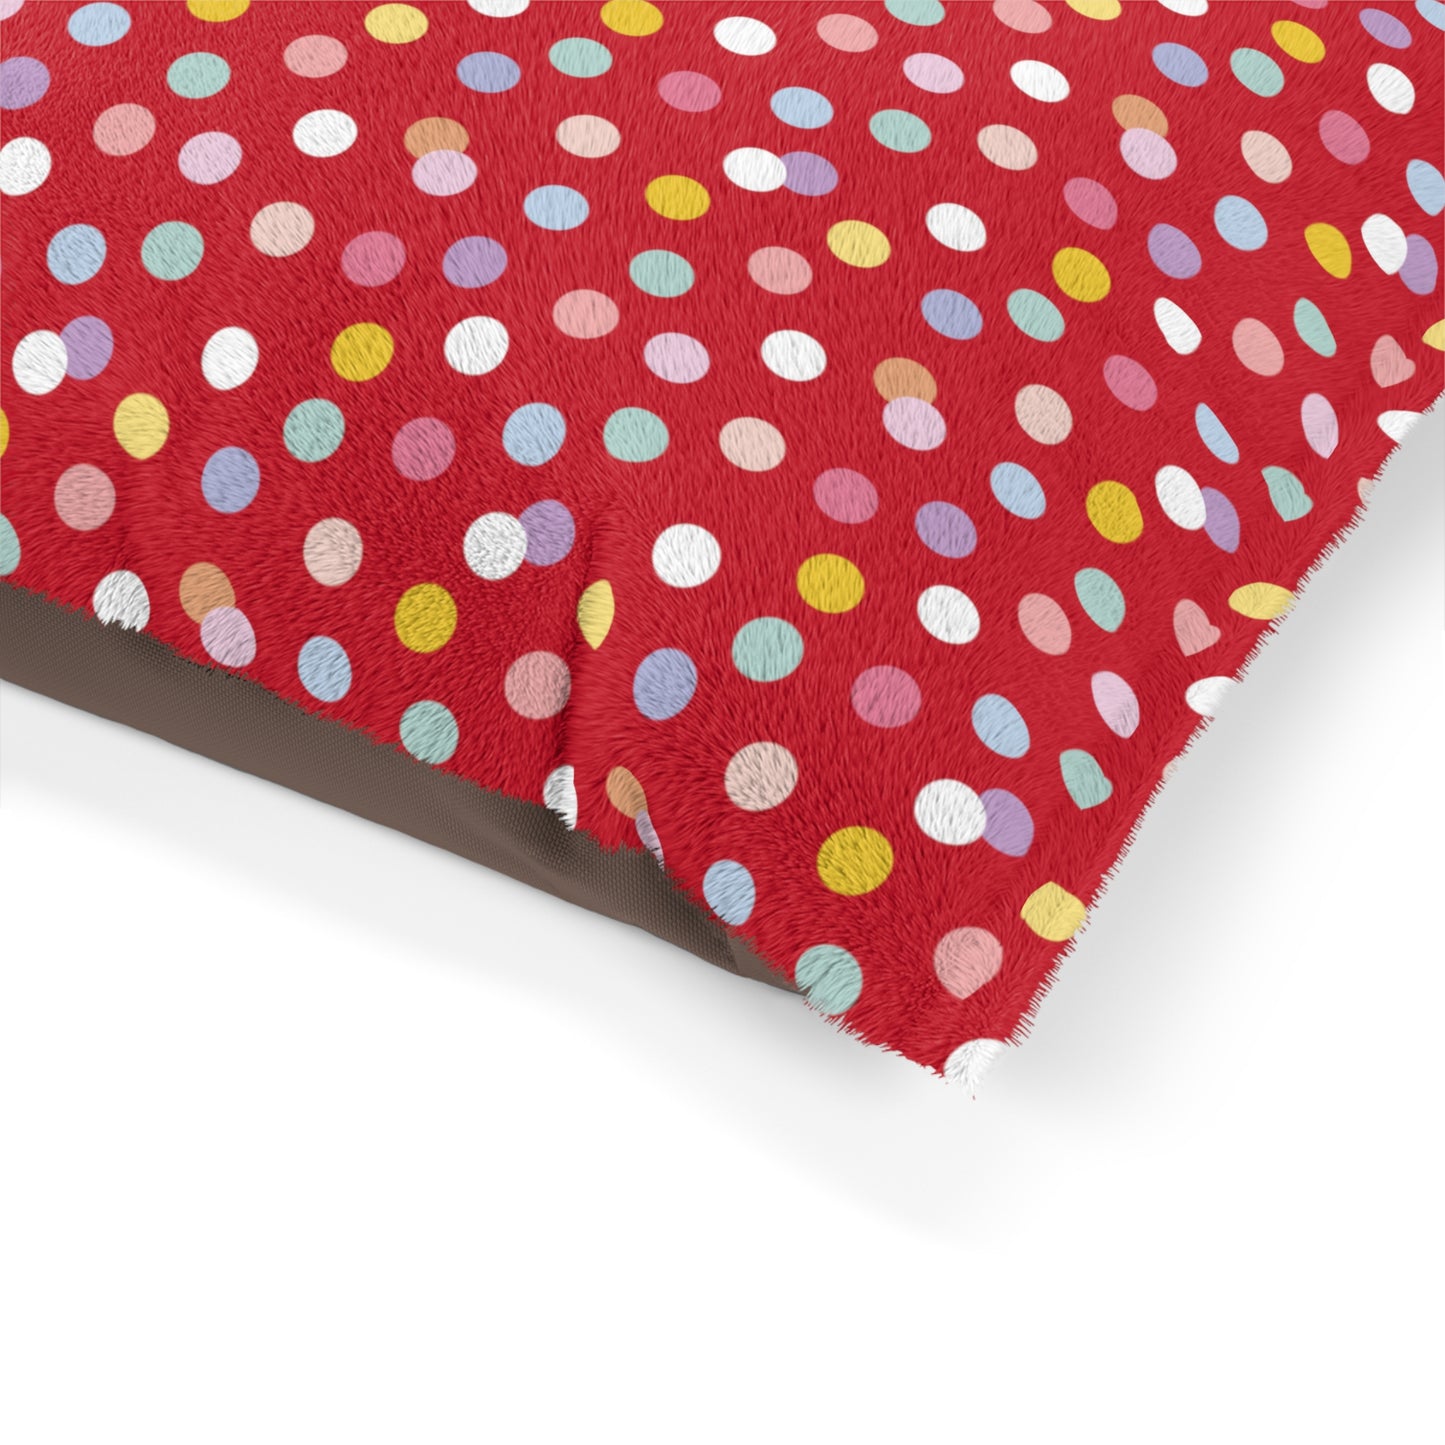 Niccie's Dotted Pattern Pet Bed - Comfy & Stylish for Cats & Dogs